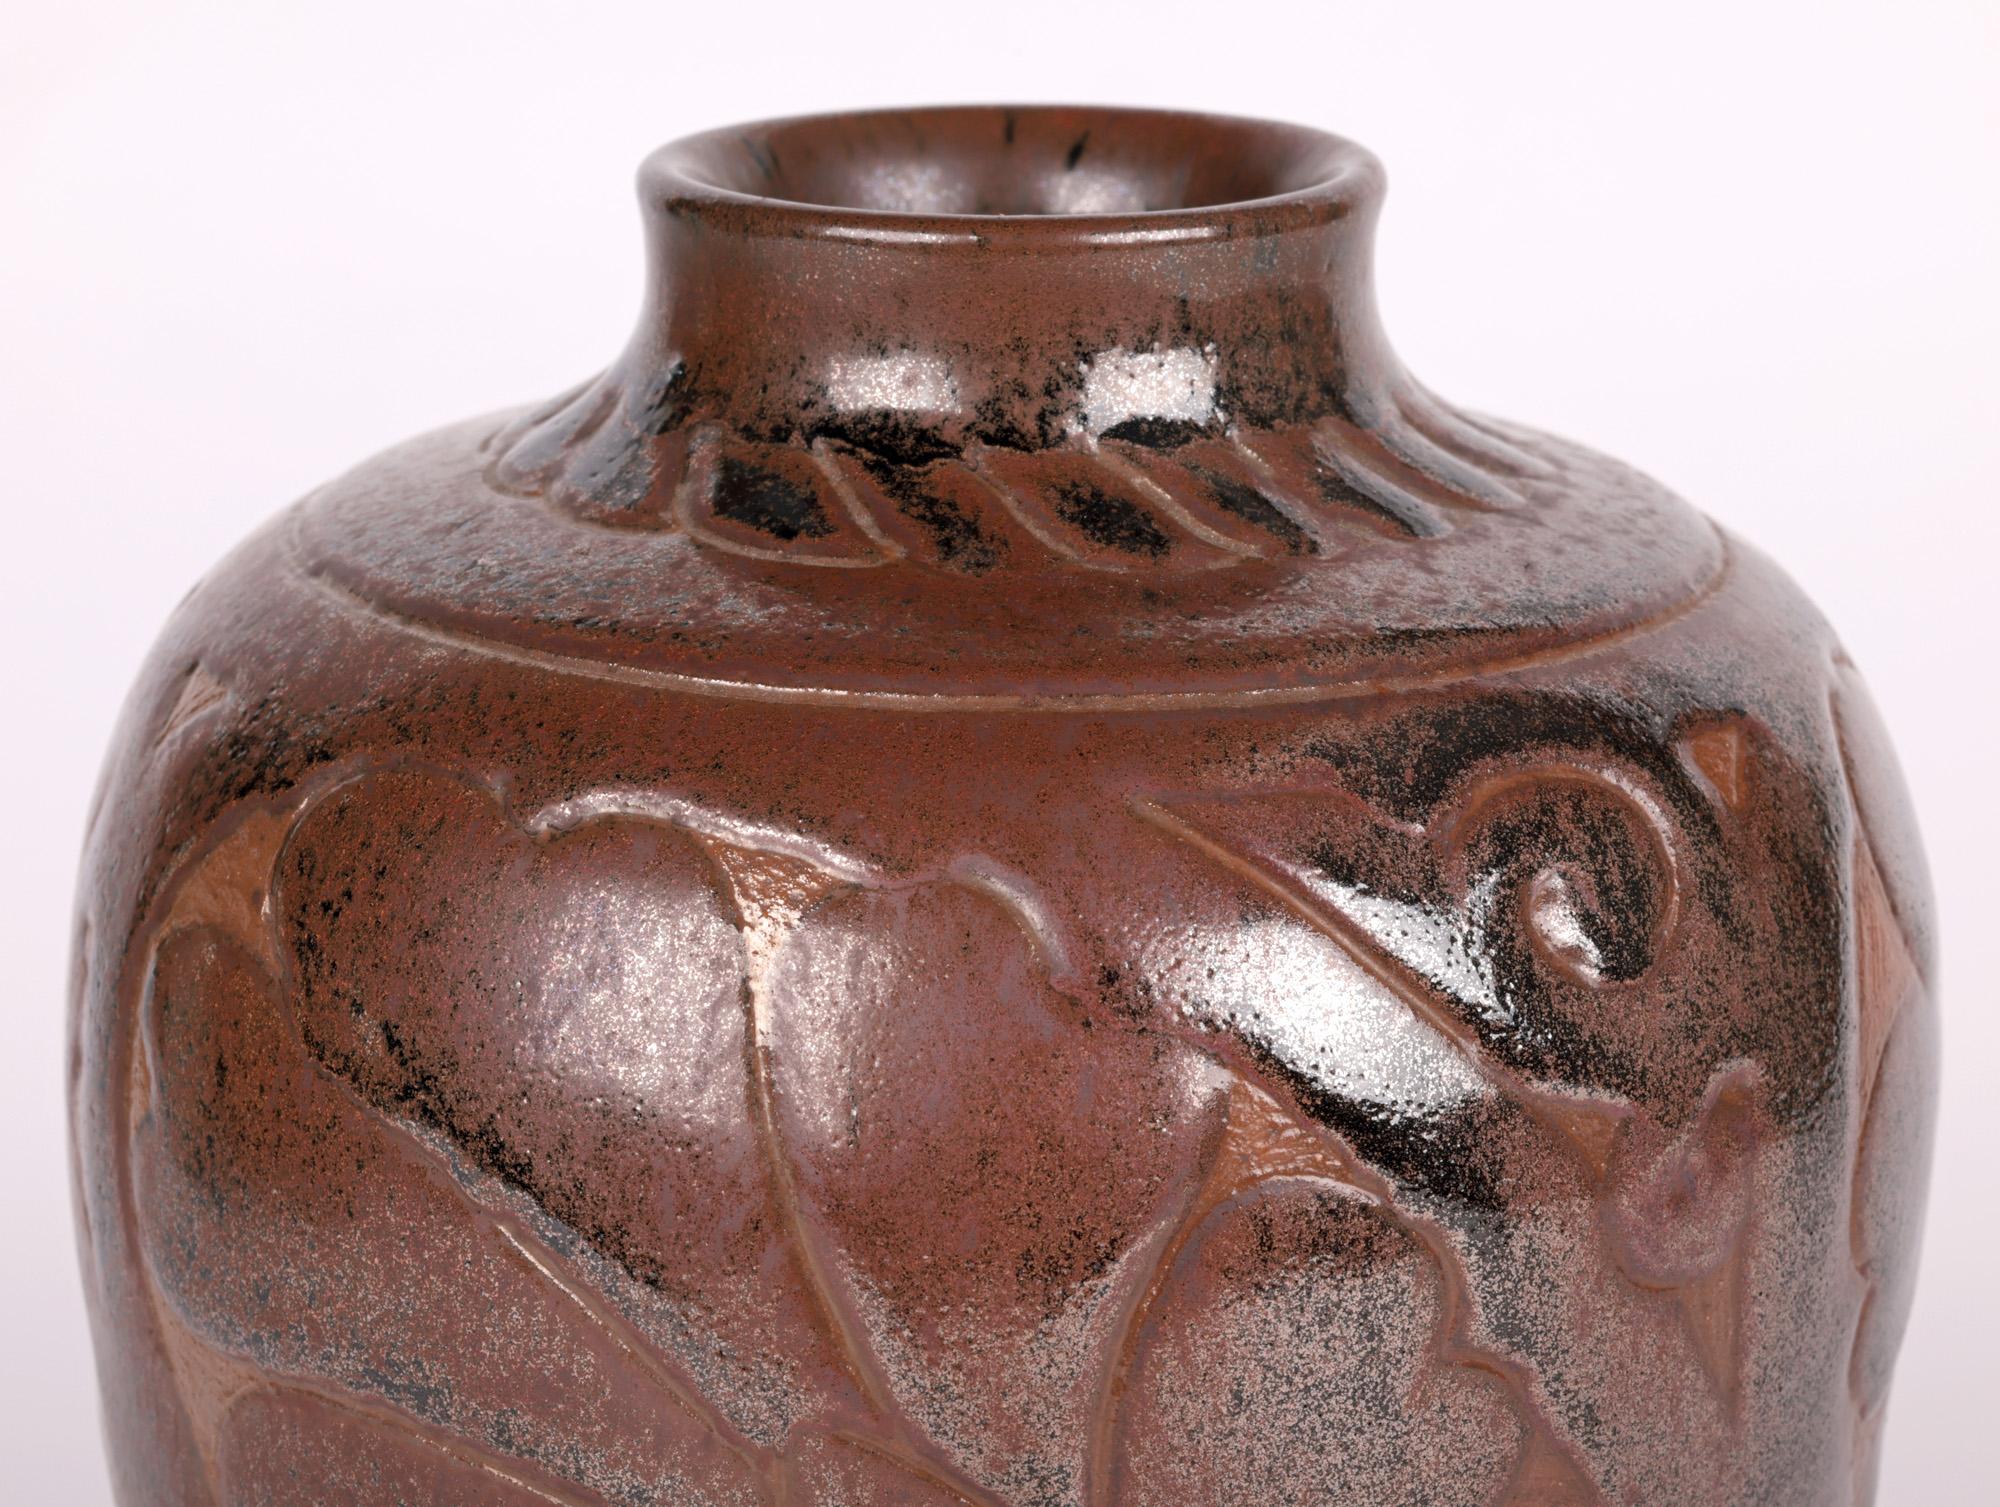 A scarce and unusual Studio Pottery vase decorated in a Chinese foliate design by renowned potter Charles Vyse (British, 1882 – 1971) and made at his Chelsea, London studios in 1928. The heavily potted vase is of tall bulbous shape standing on a